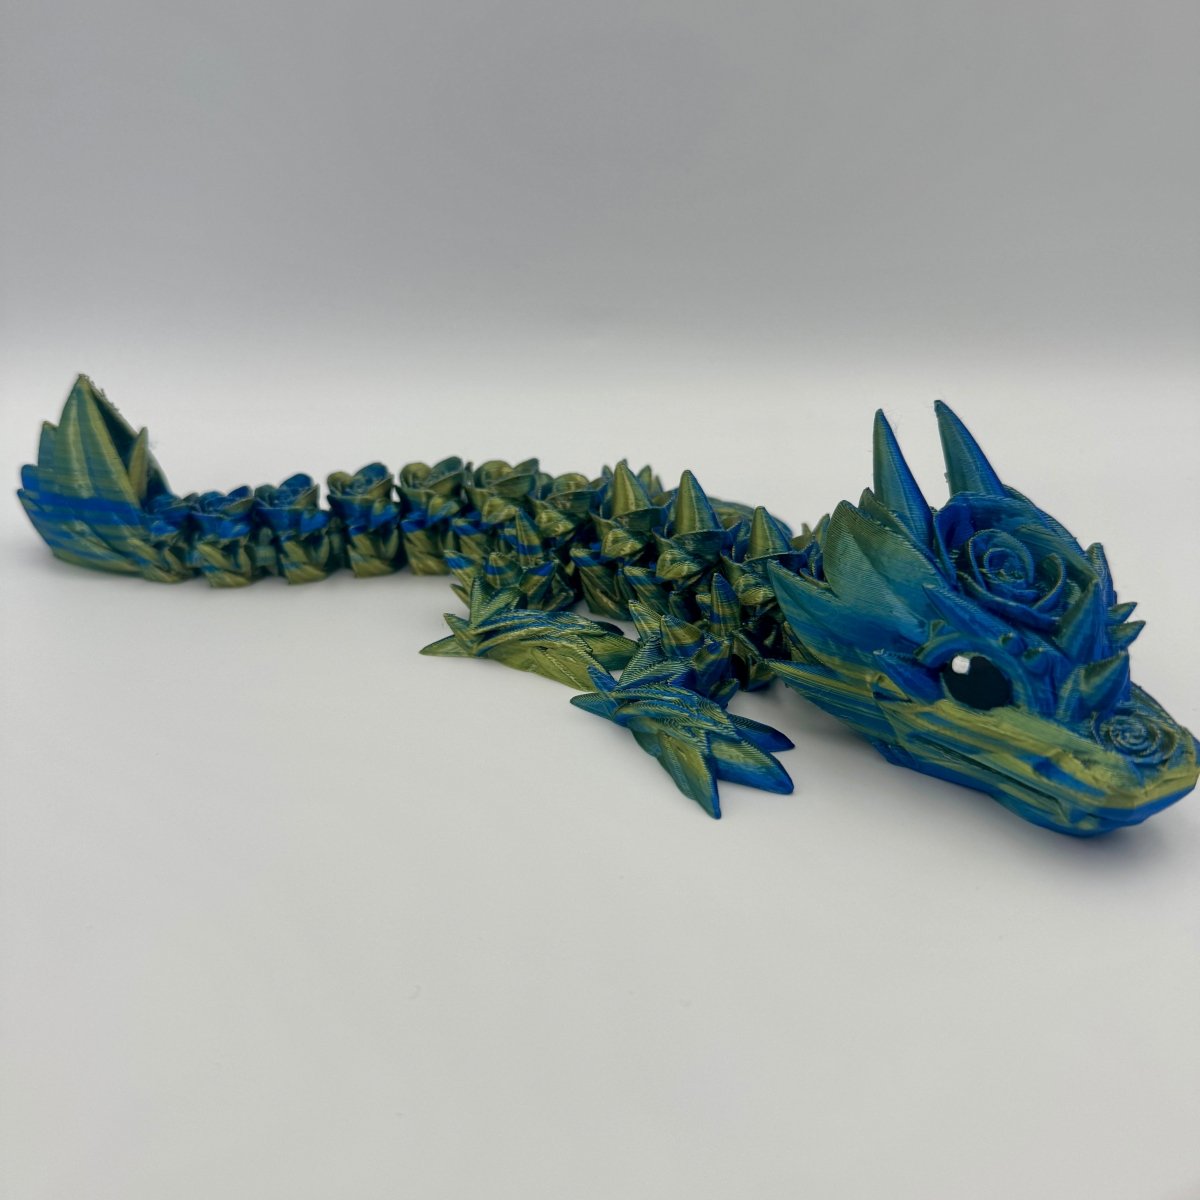 Baby Rose Dragon 12" Articulated Dragon - Cosmic Chameleon